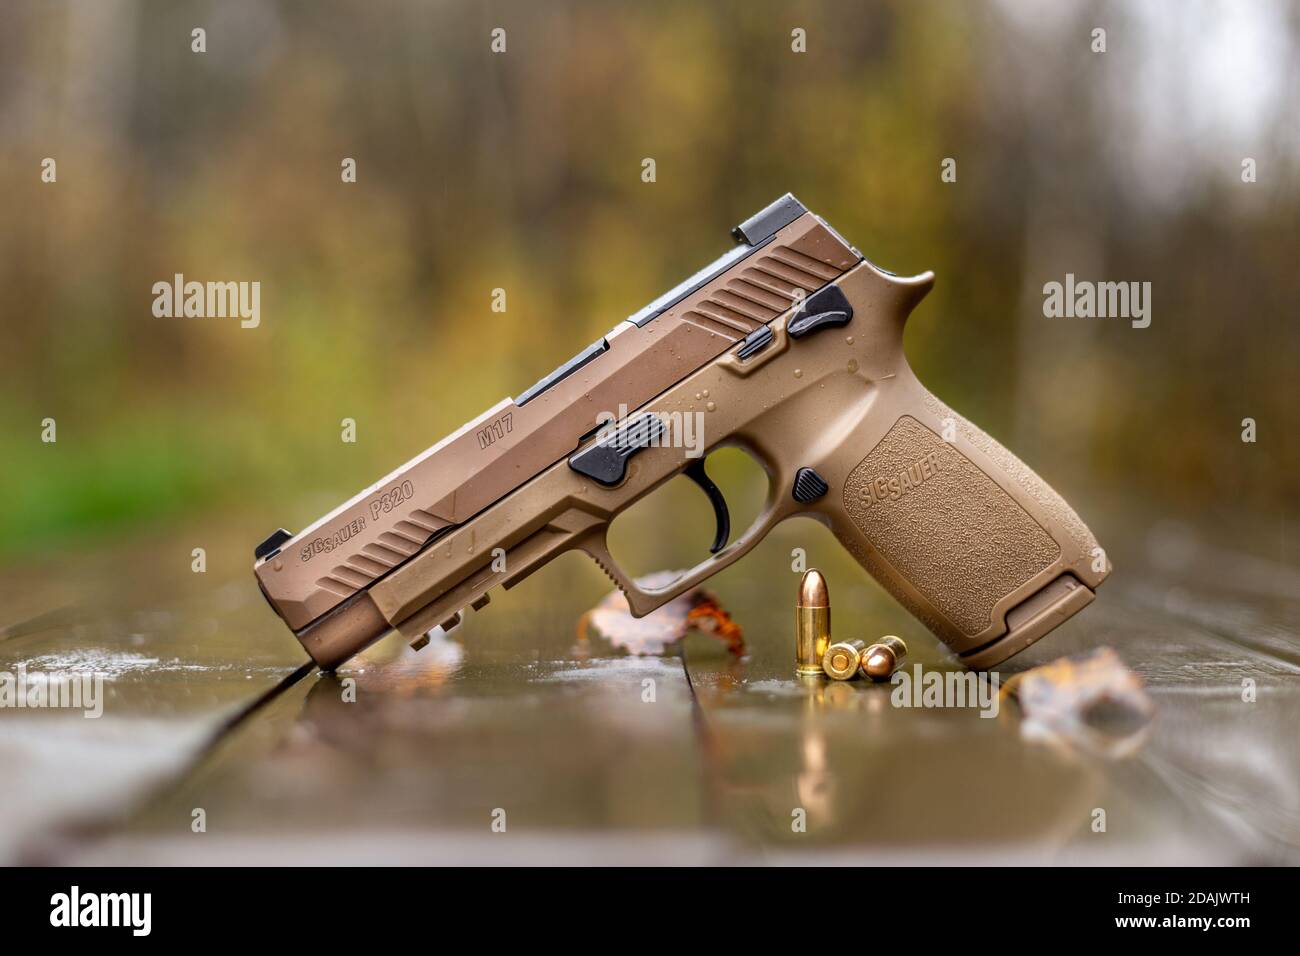 10 Sig Sauer Pistol HD Wallpapers and Backgrounds